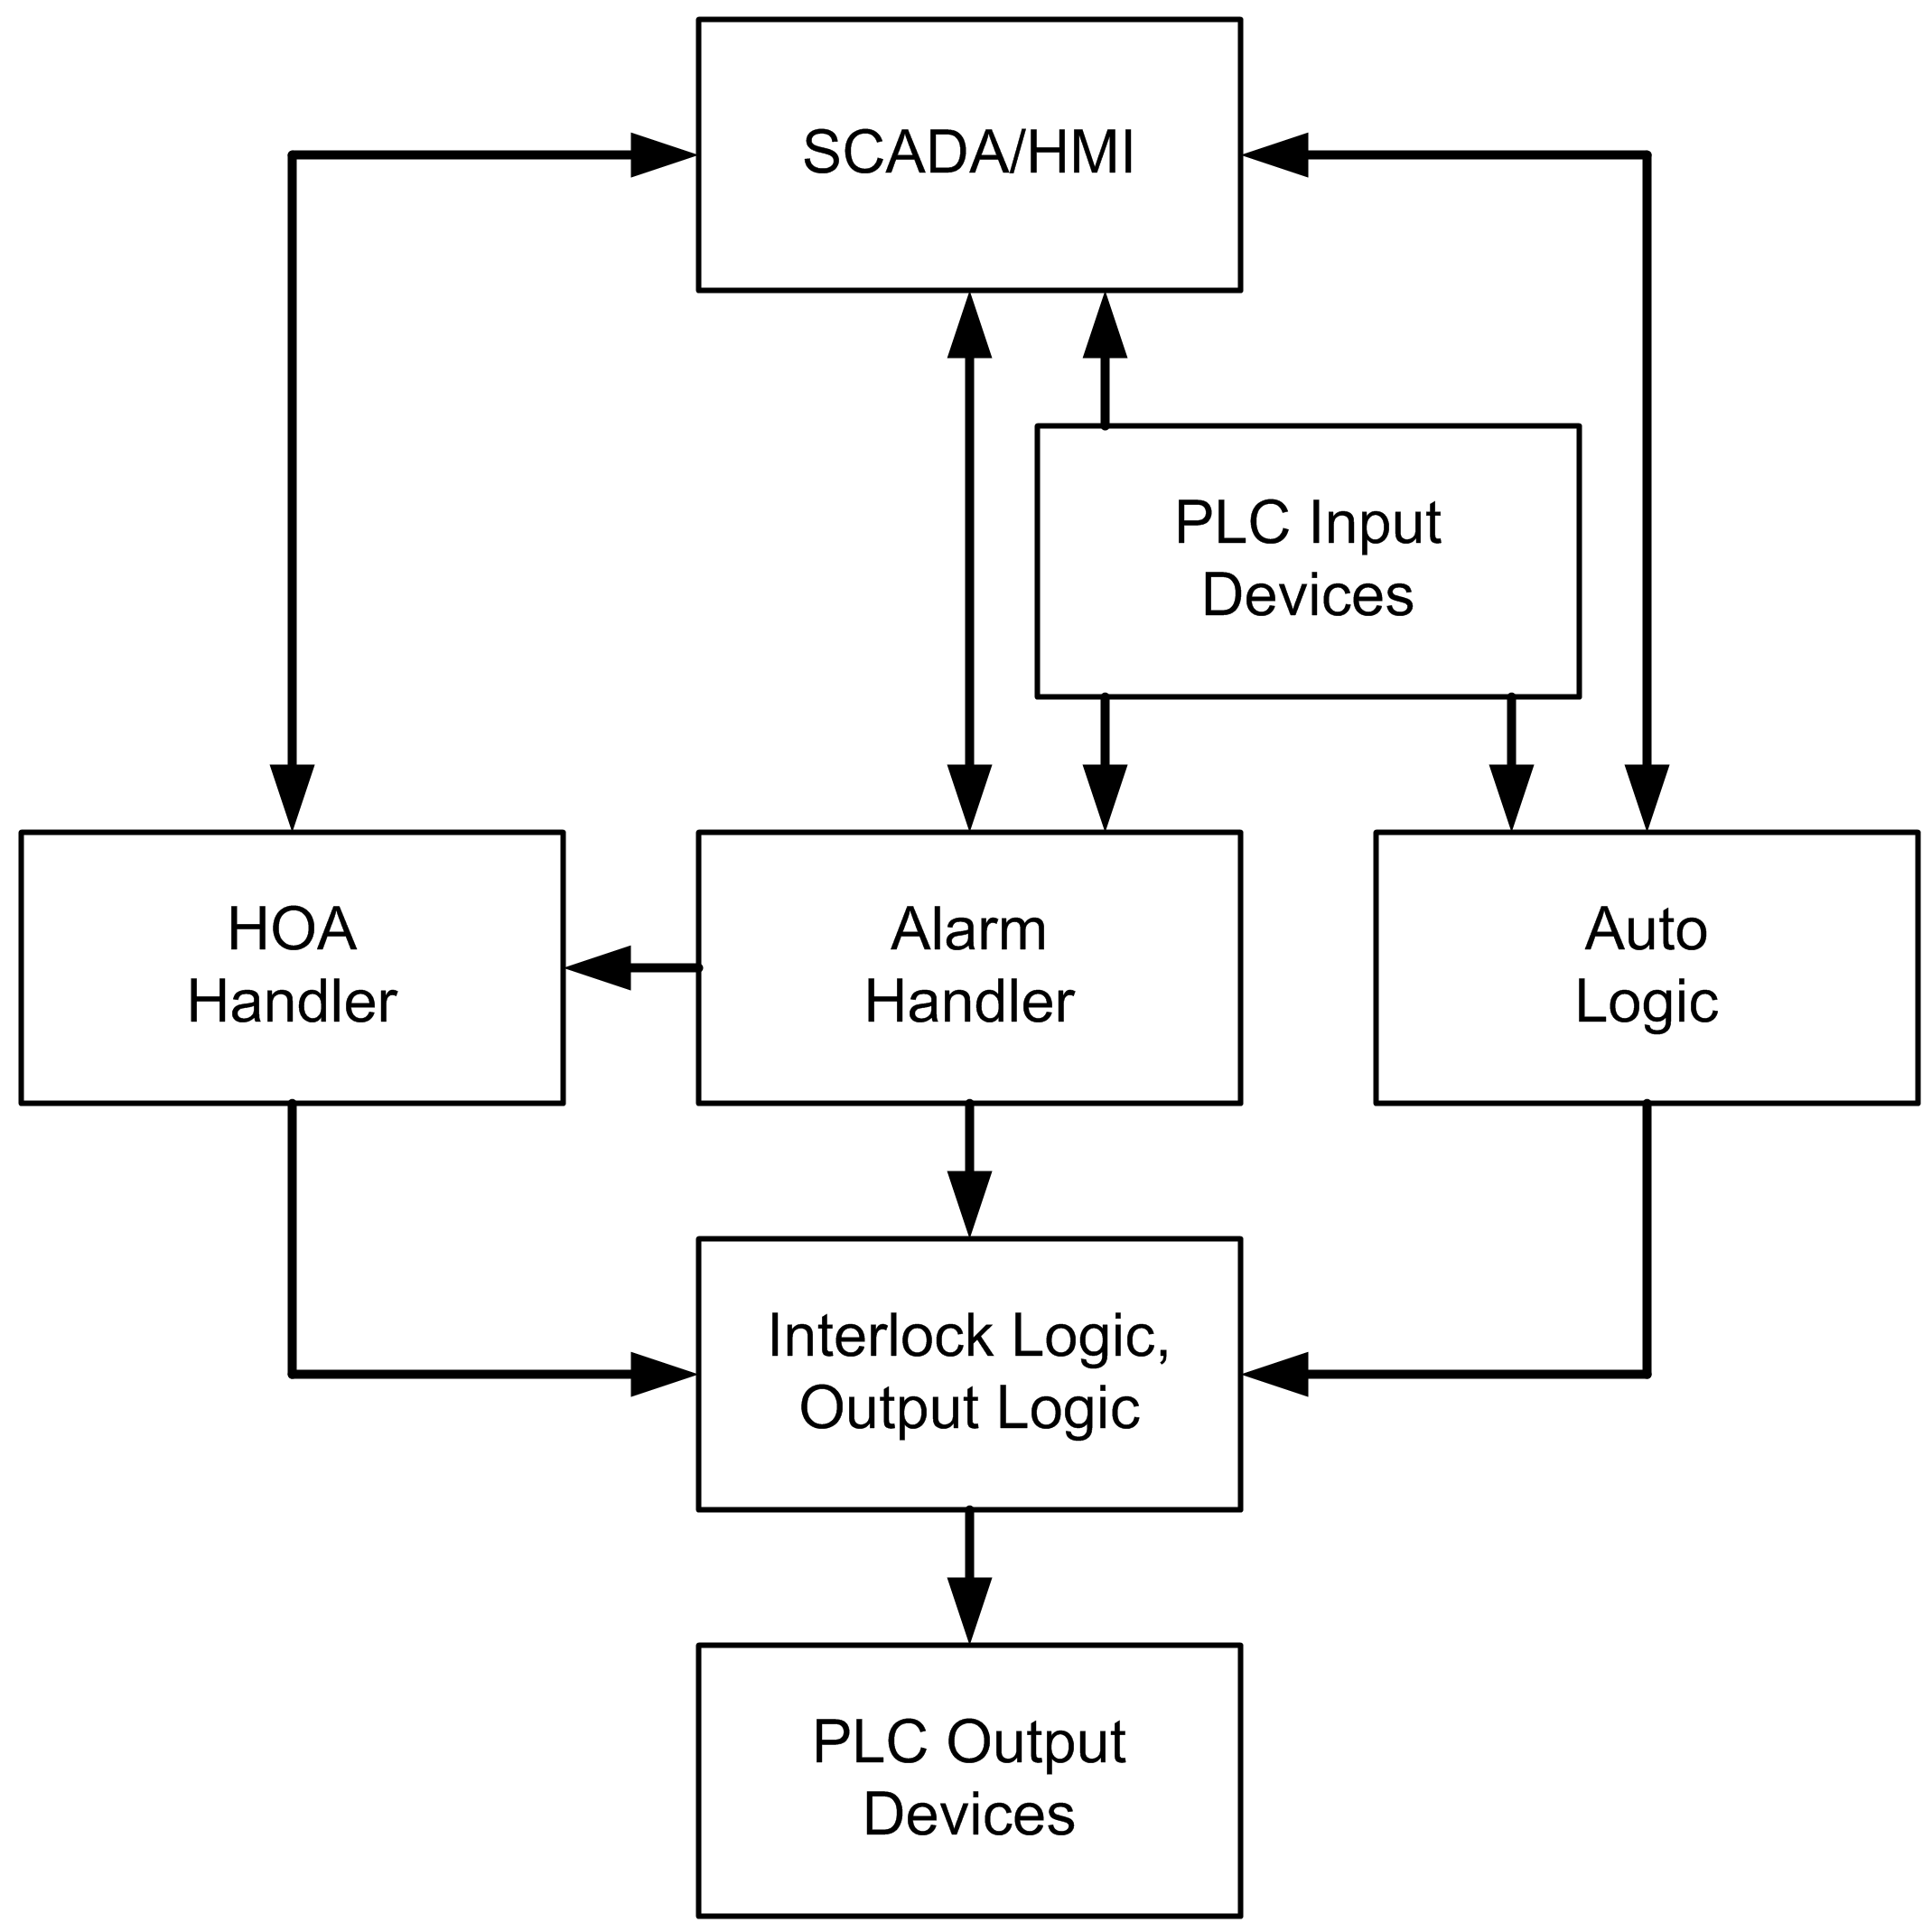 design a plc ladder logic program to control the operation of an alarm